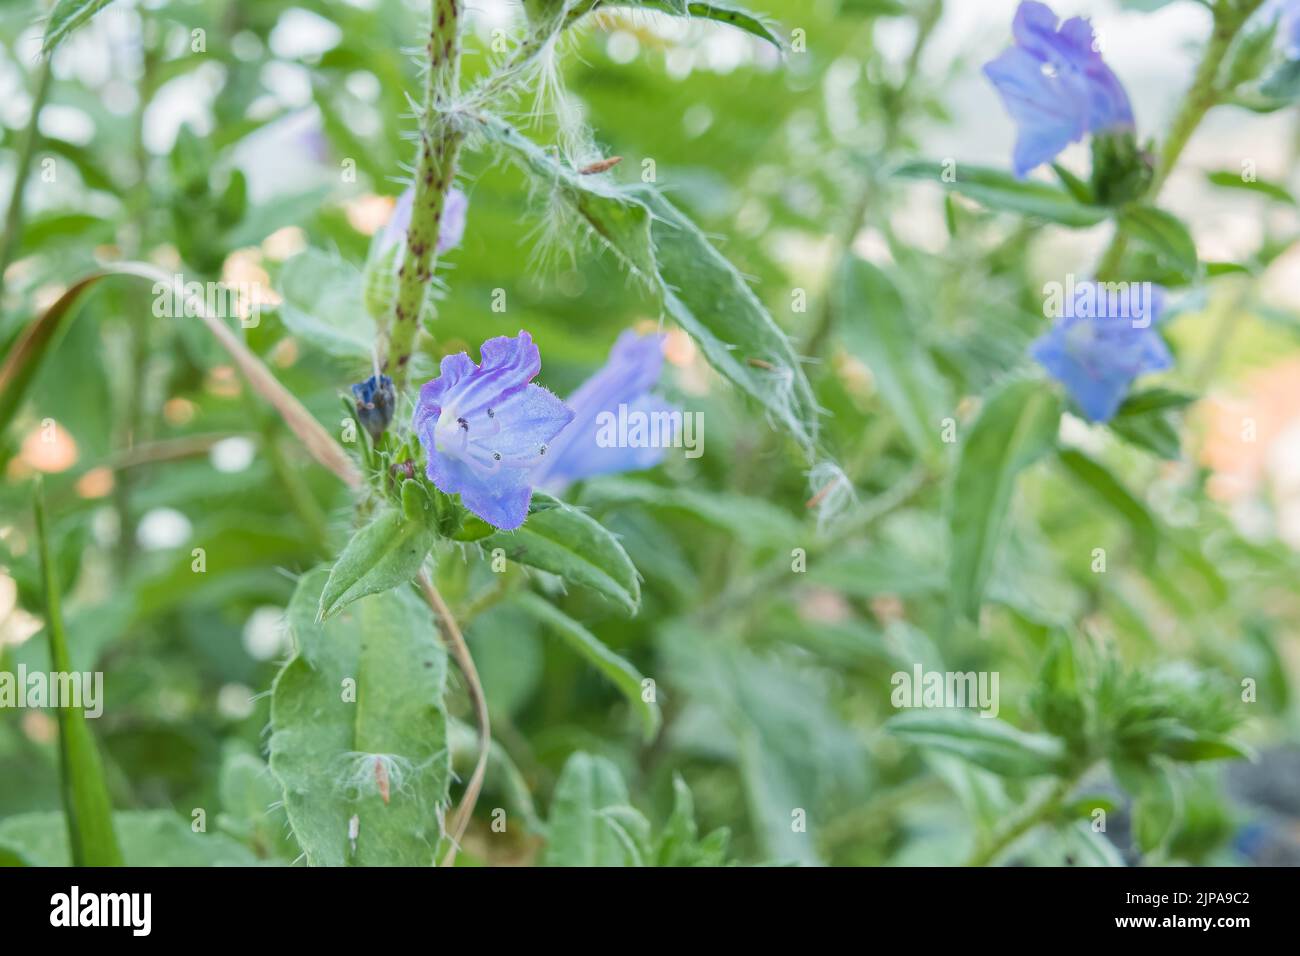 blue devil or vipers bugloss plant in bloom in summer outdoors Stock Photo